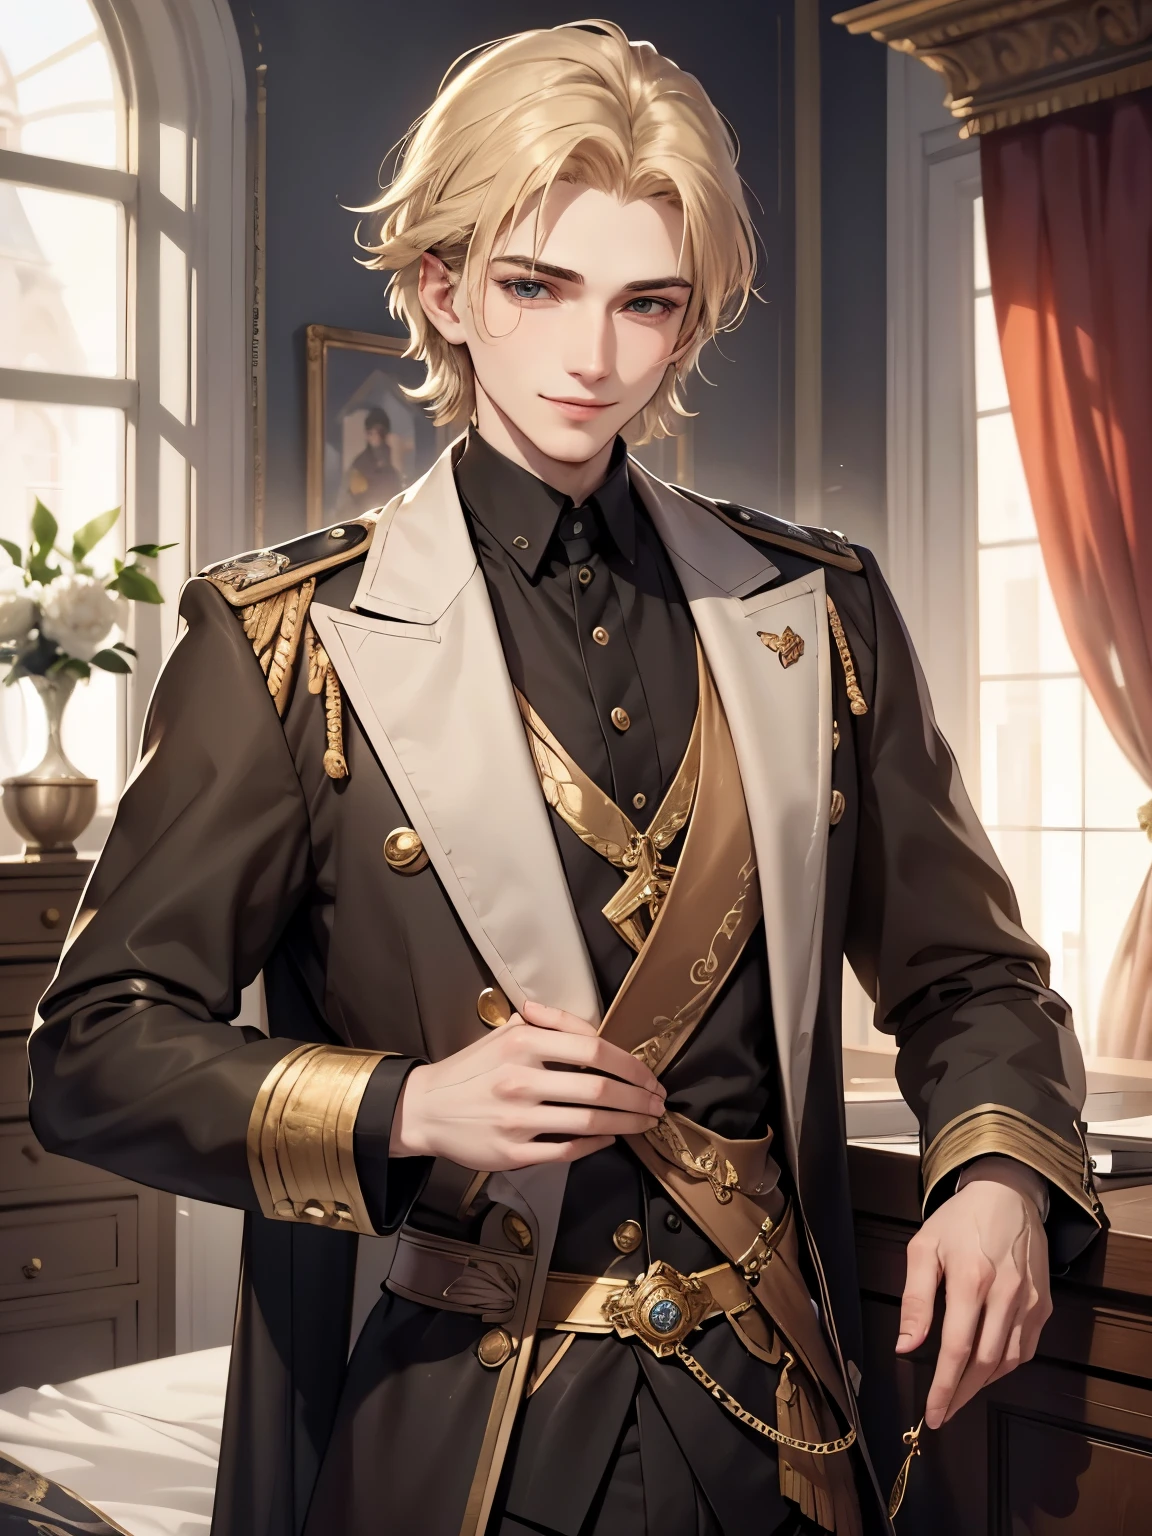 Nikolai is 20 years old, he has golden hair, shaved on one side and styled on the other, light brown eyes and slightly hooked nose, he has a beautiful face, &quot;outlined by the features of a fairy-tale prince&quot;. He is described as extremely charming, handsome and smiling